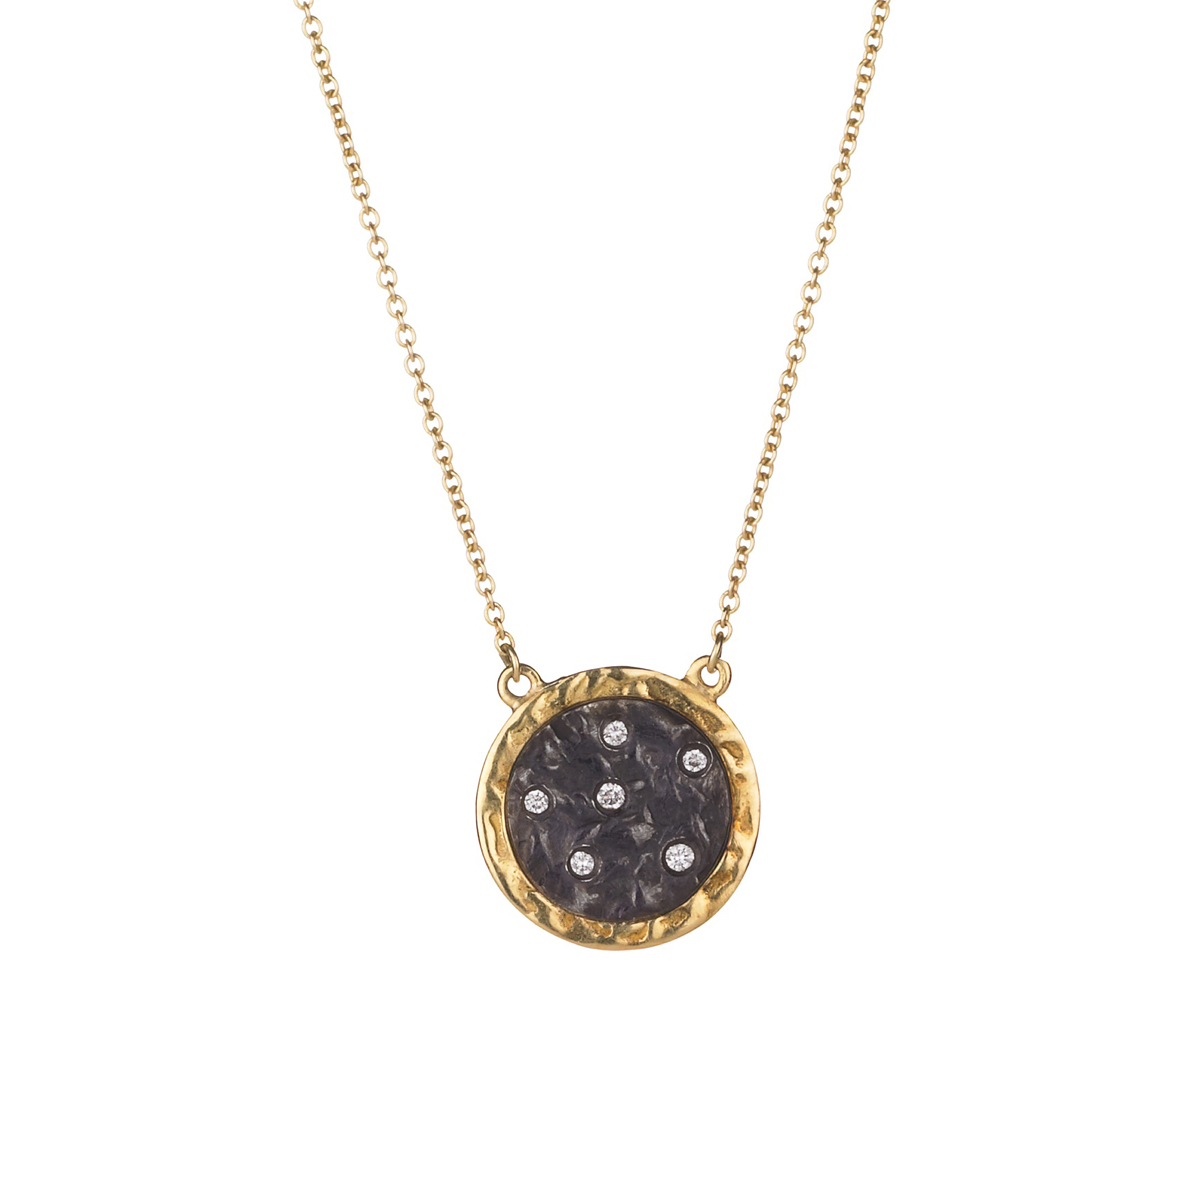 18K Gold and Oxidized Silver Mini Midnight Pendant Necklace with ...